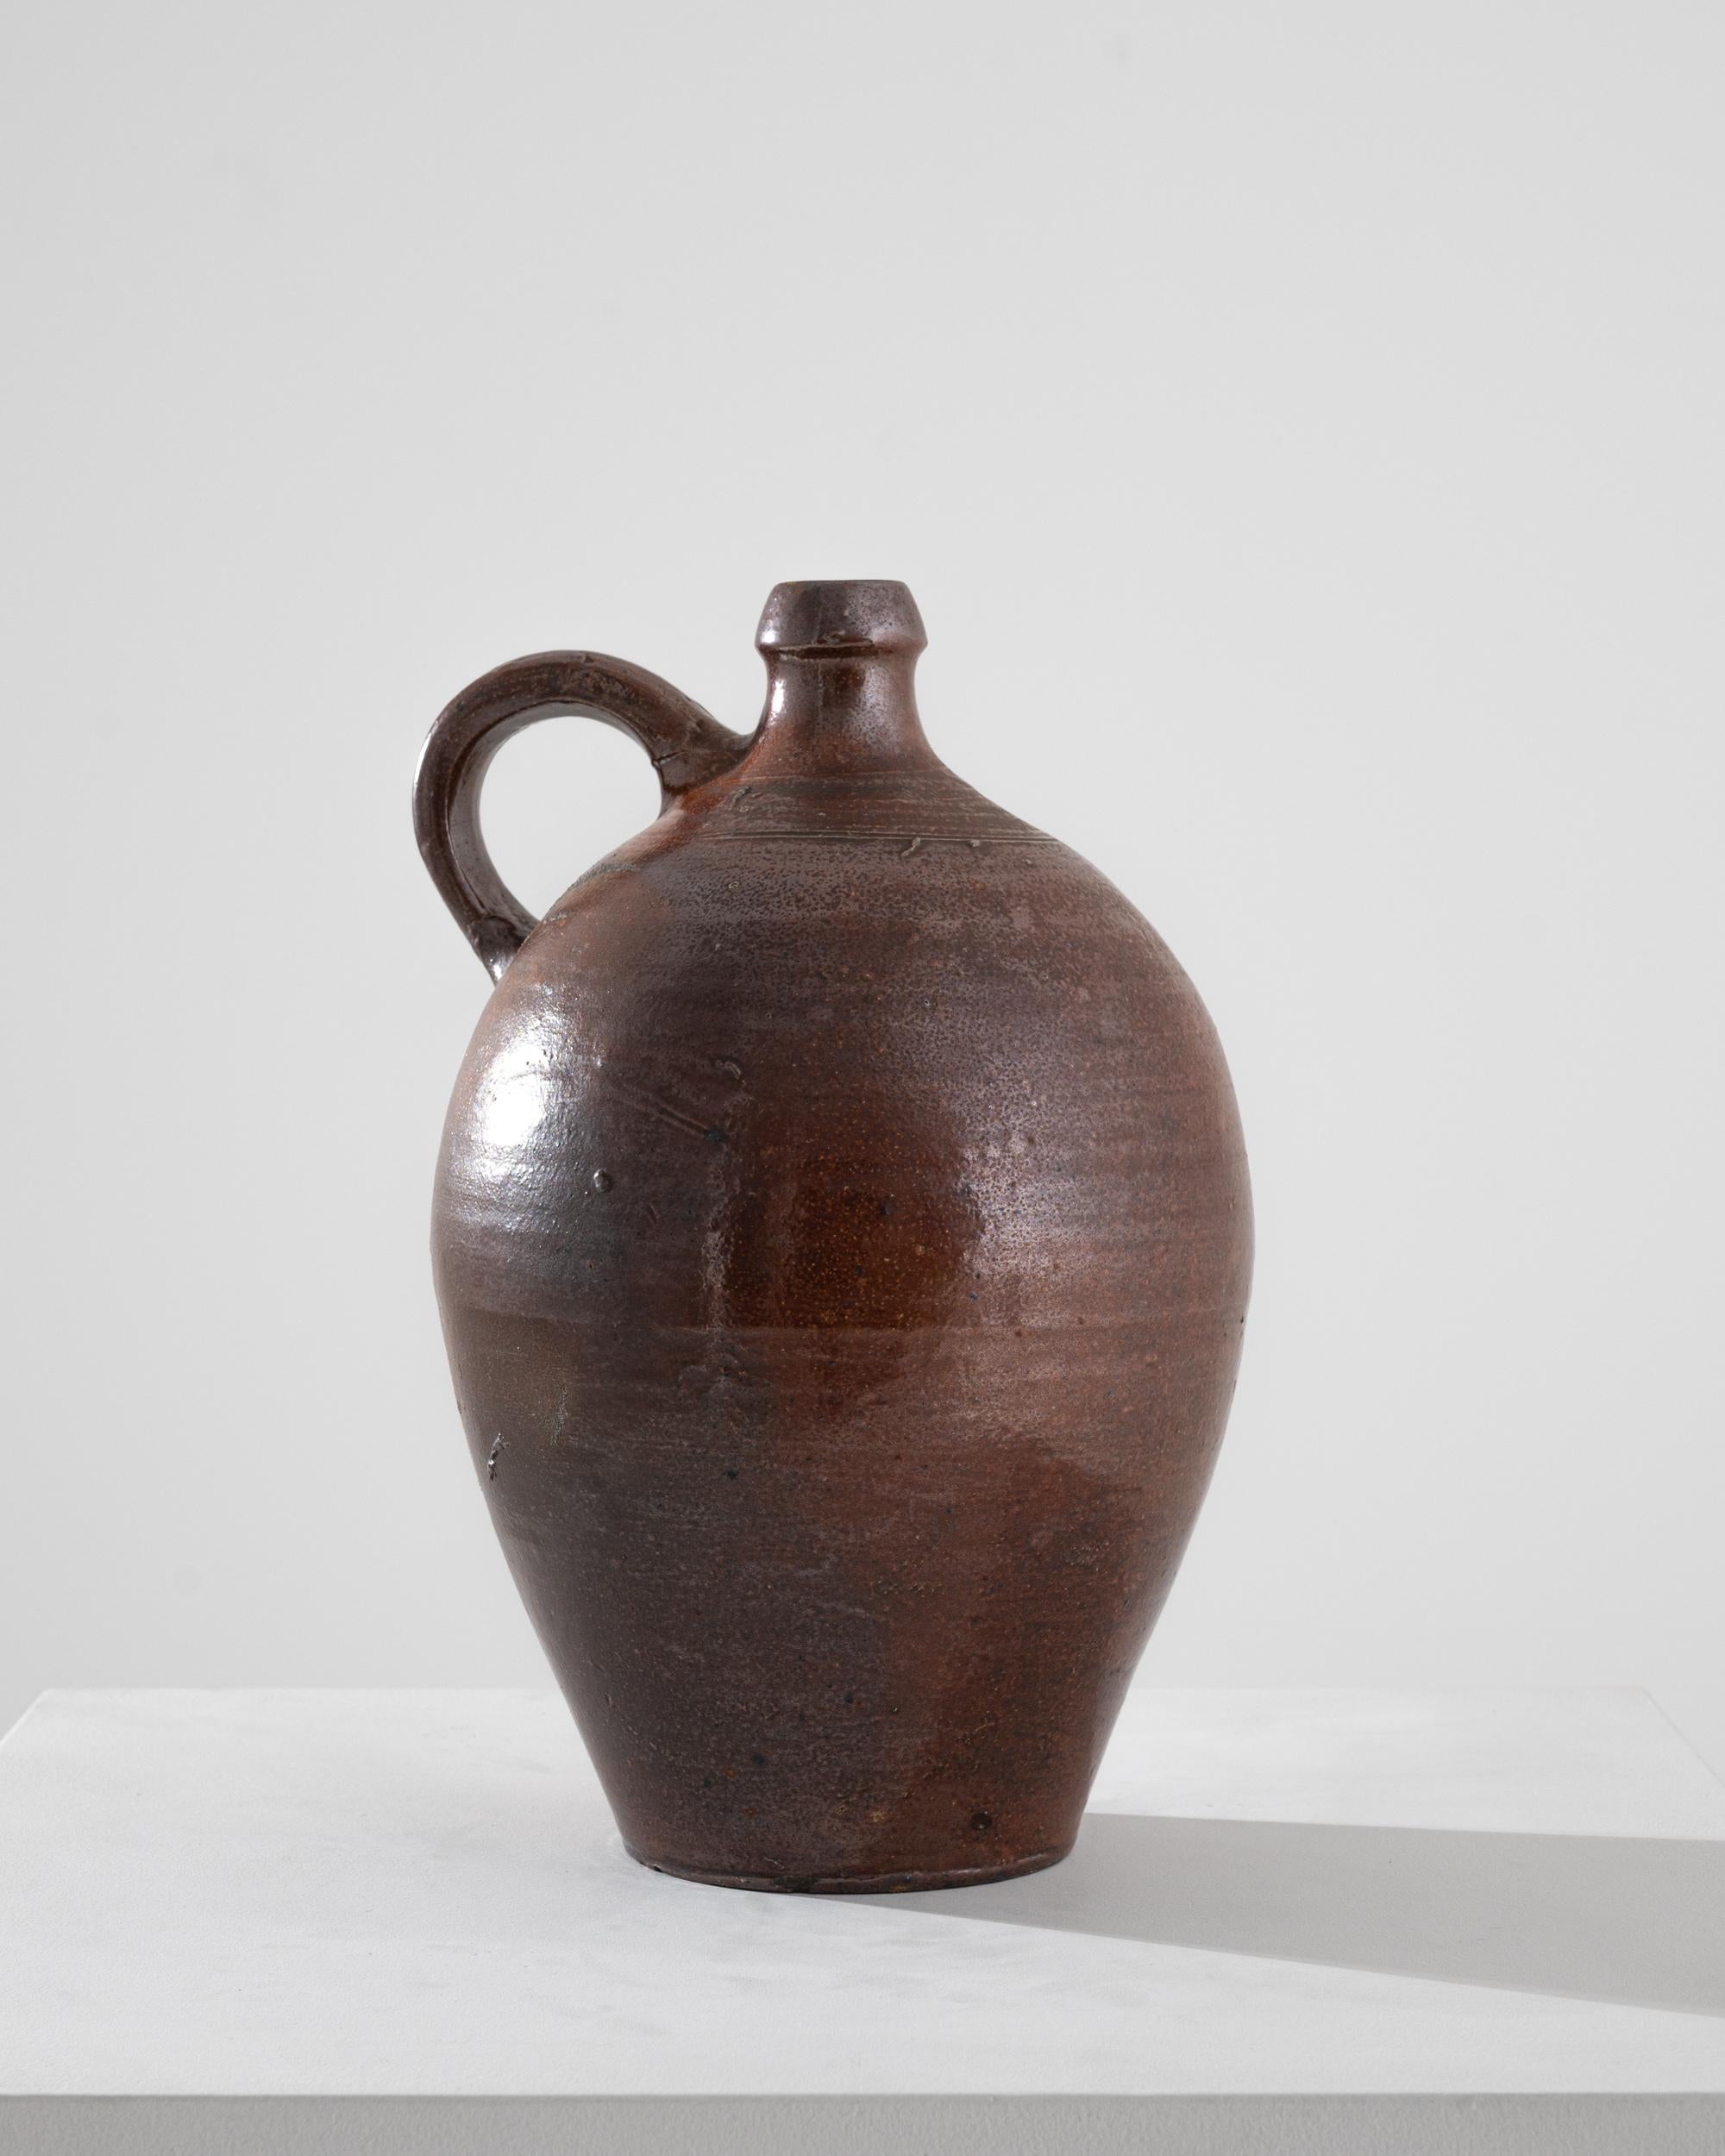 This antique stoneware flagon makes a delightful rustic accent. Made in France in the 1800s, the ceramic was fired at extremely high temperatures, granting it the durability and longevity of stone. These bottles were often originally used to store